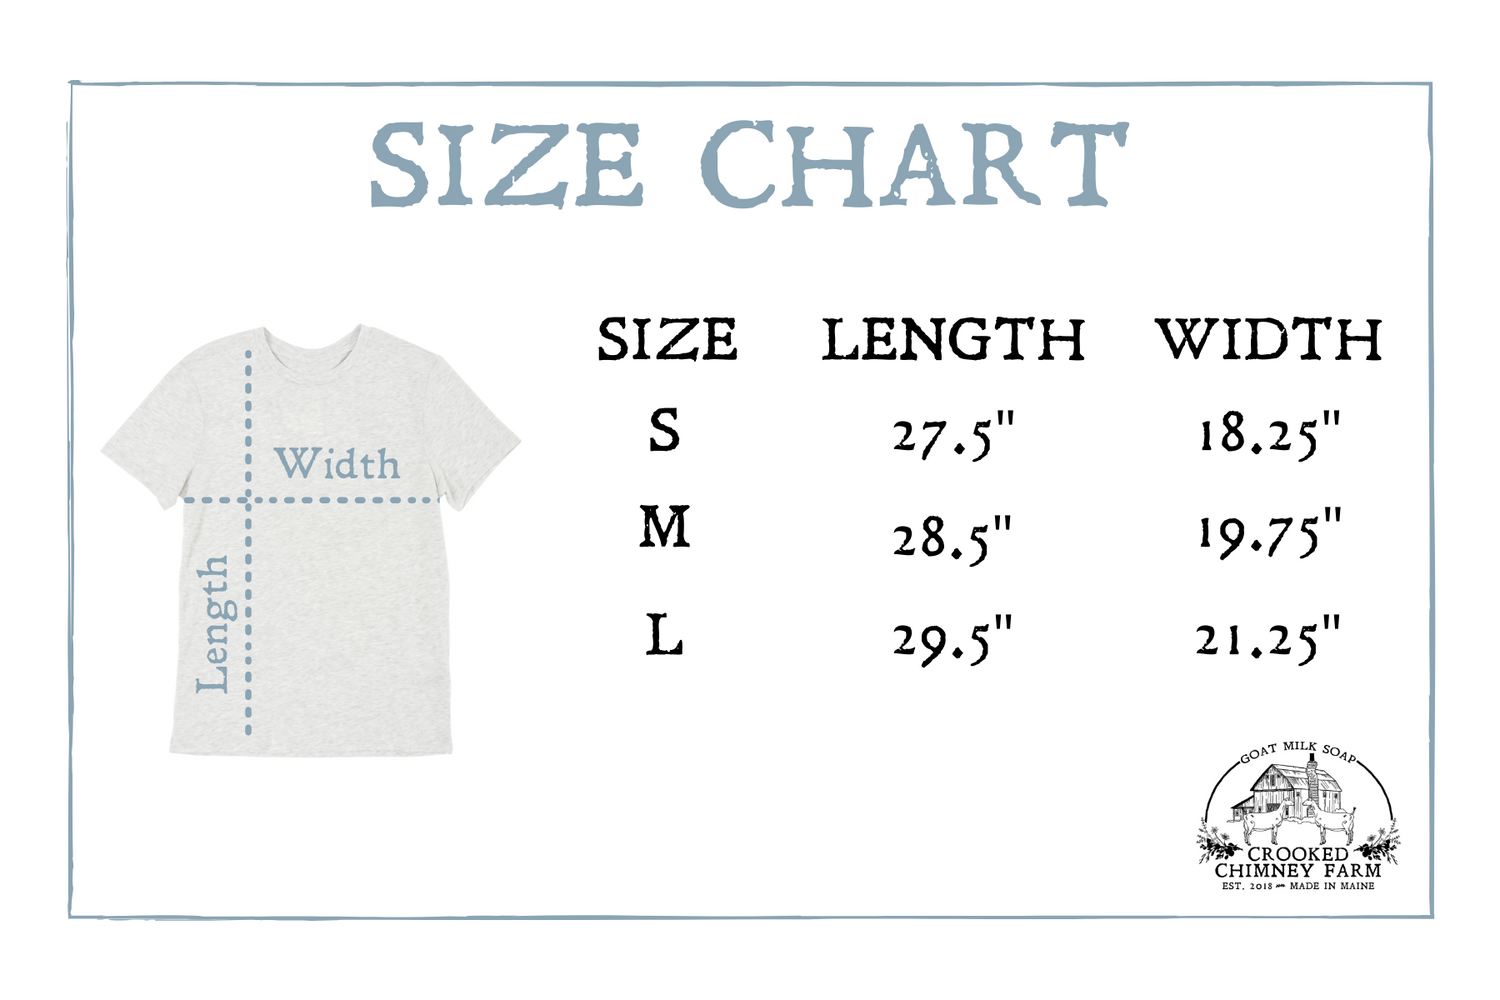 SIZE CHART for tee shirt. Small 27.5&quot; by 18.25&quot;, Medium 28.5&quot; by 19.75&quot; Large 29.5&quot; by 21.25&quot;